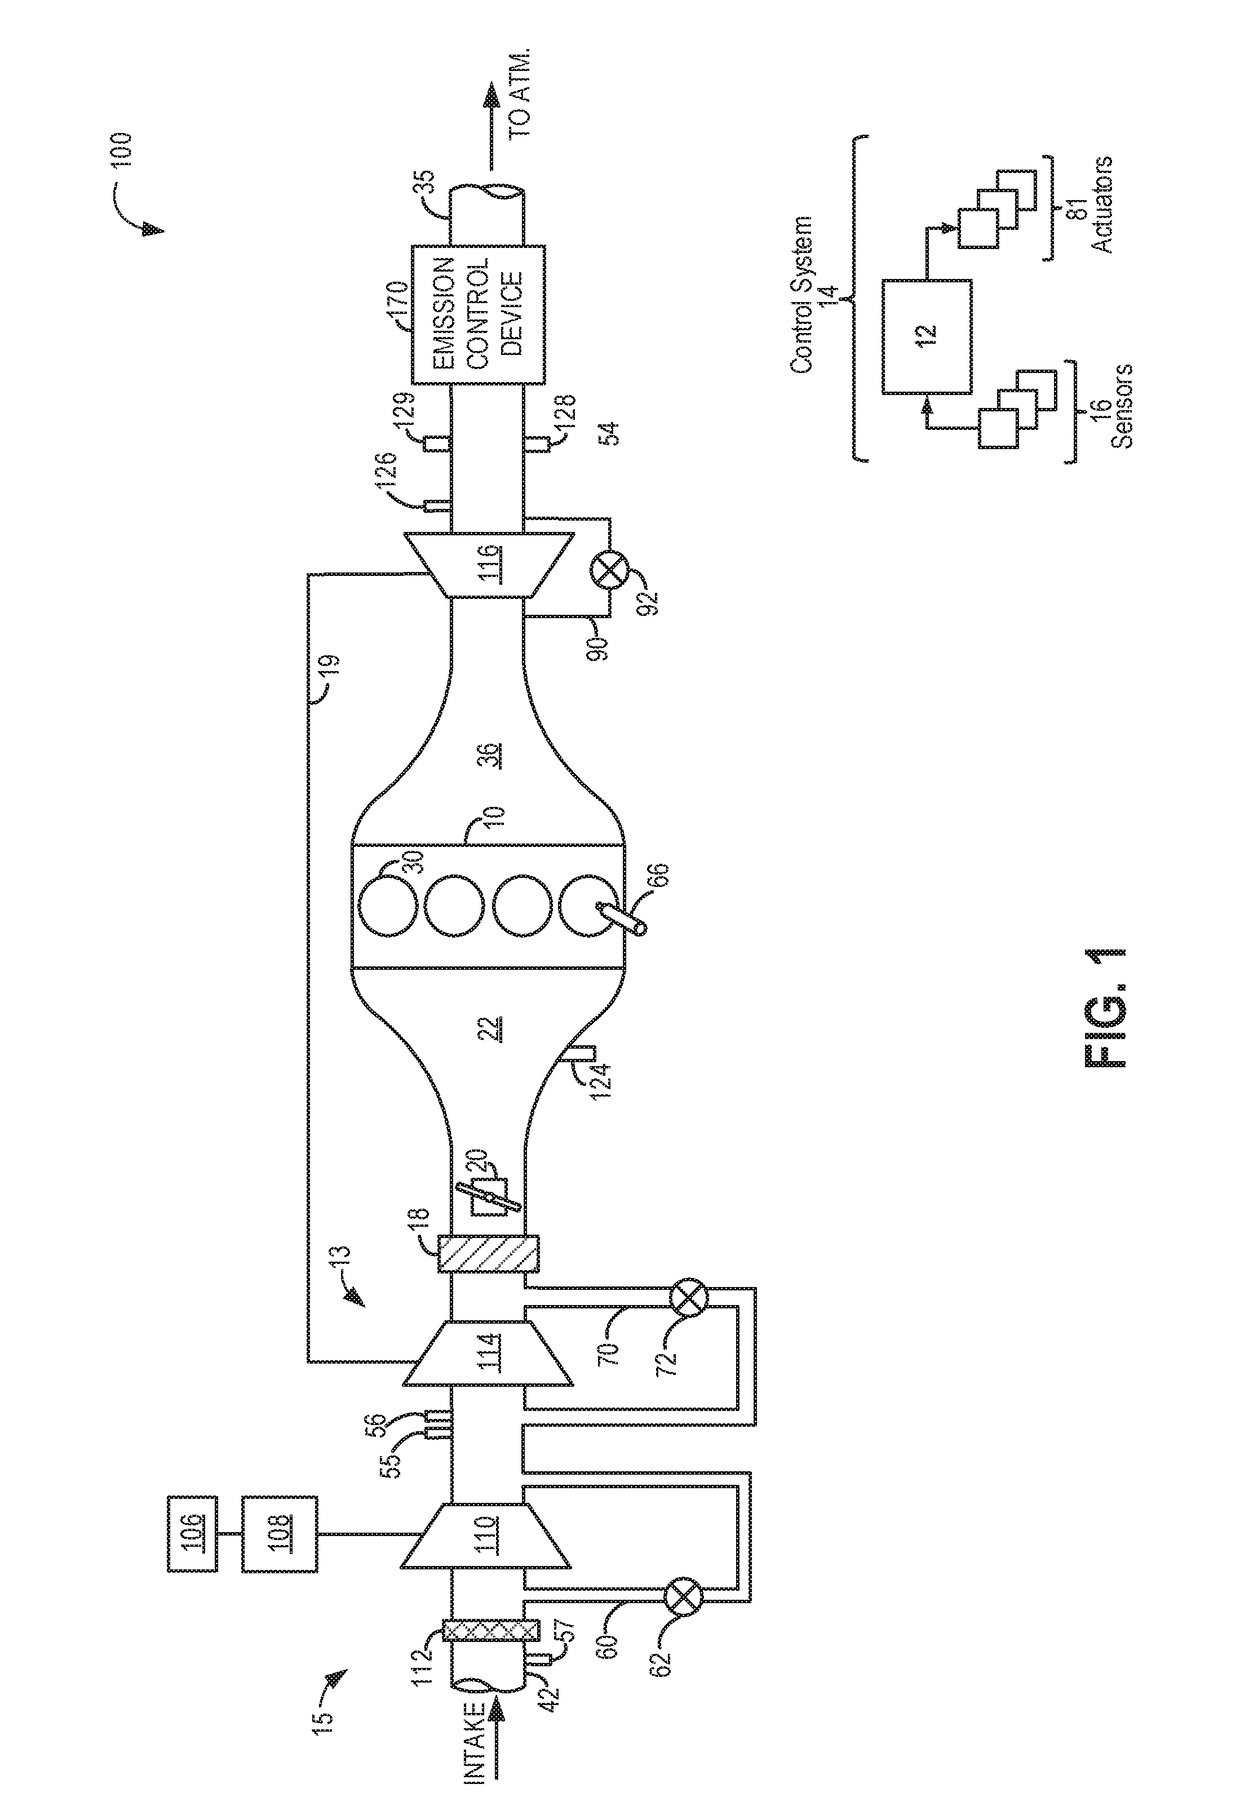 Method and system for boost pressure control